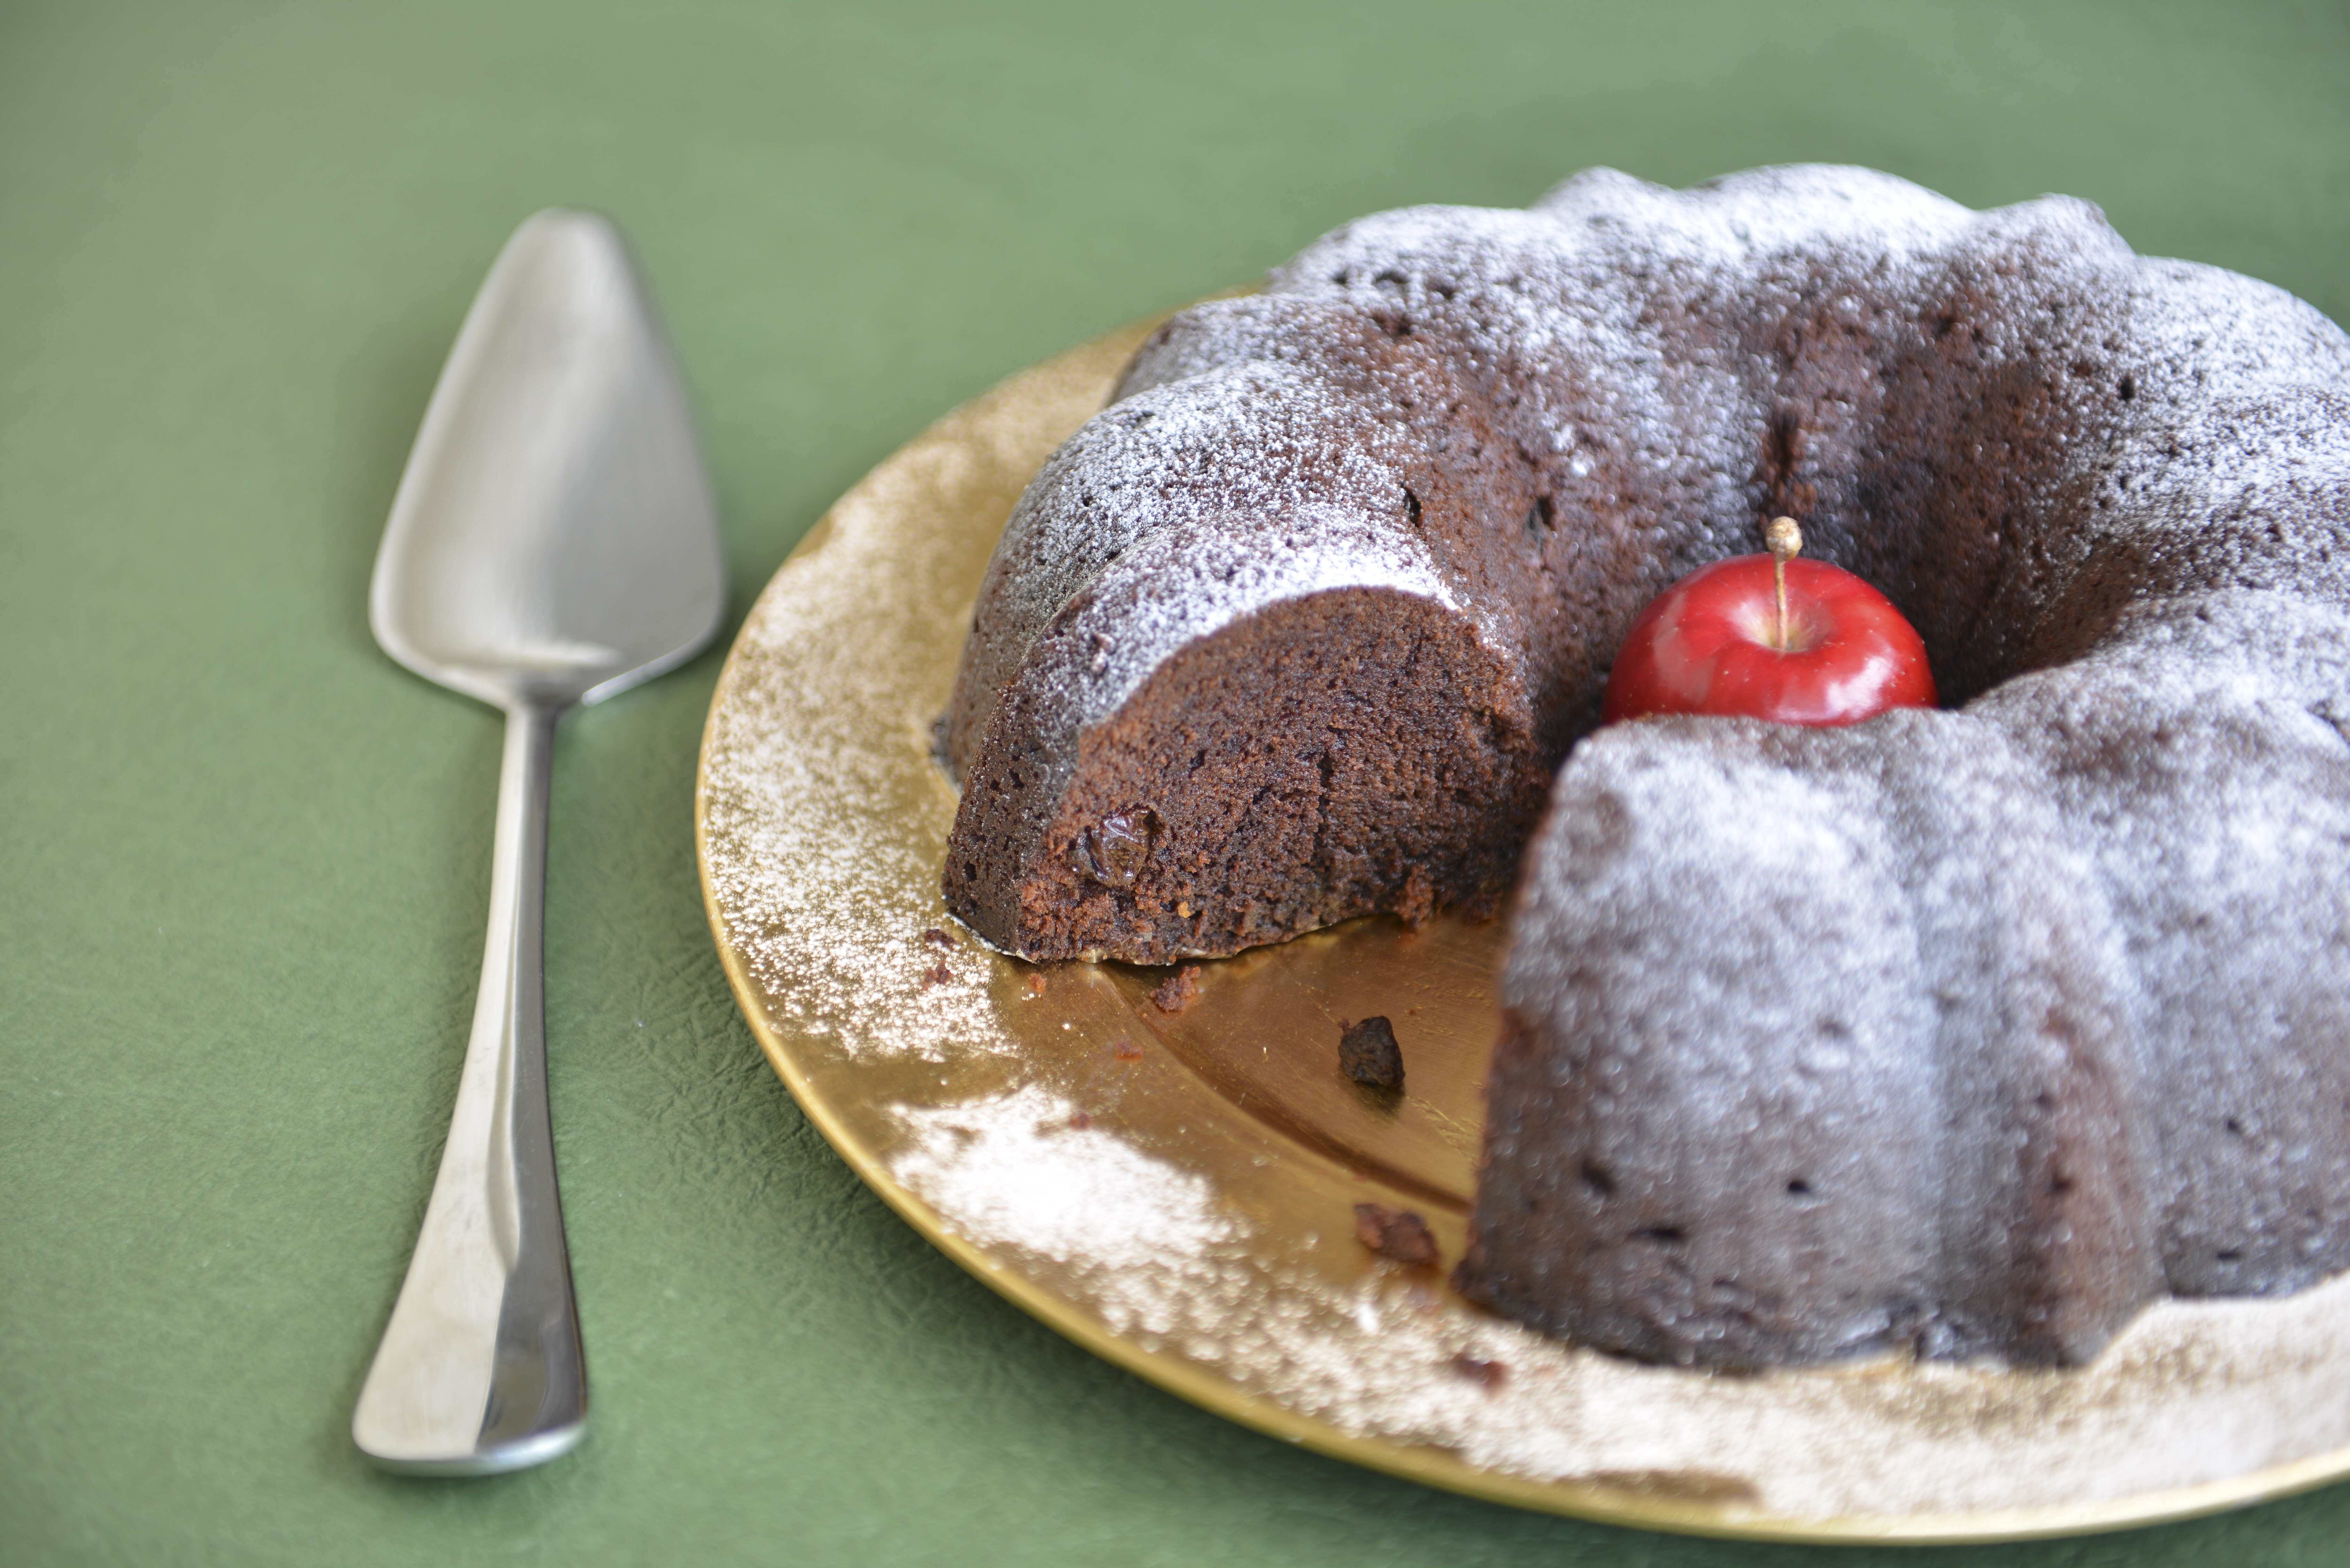 How To Make A Nsfm Chocolate Rum Raisin Cake It Might Not Look Like Much But It Packs A Punch South China Morning Post